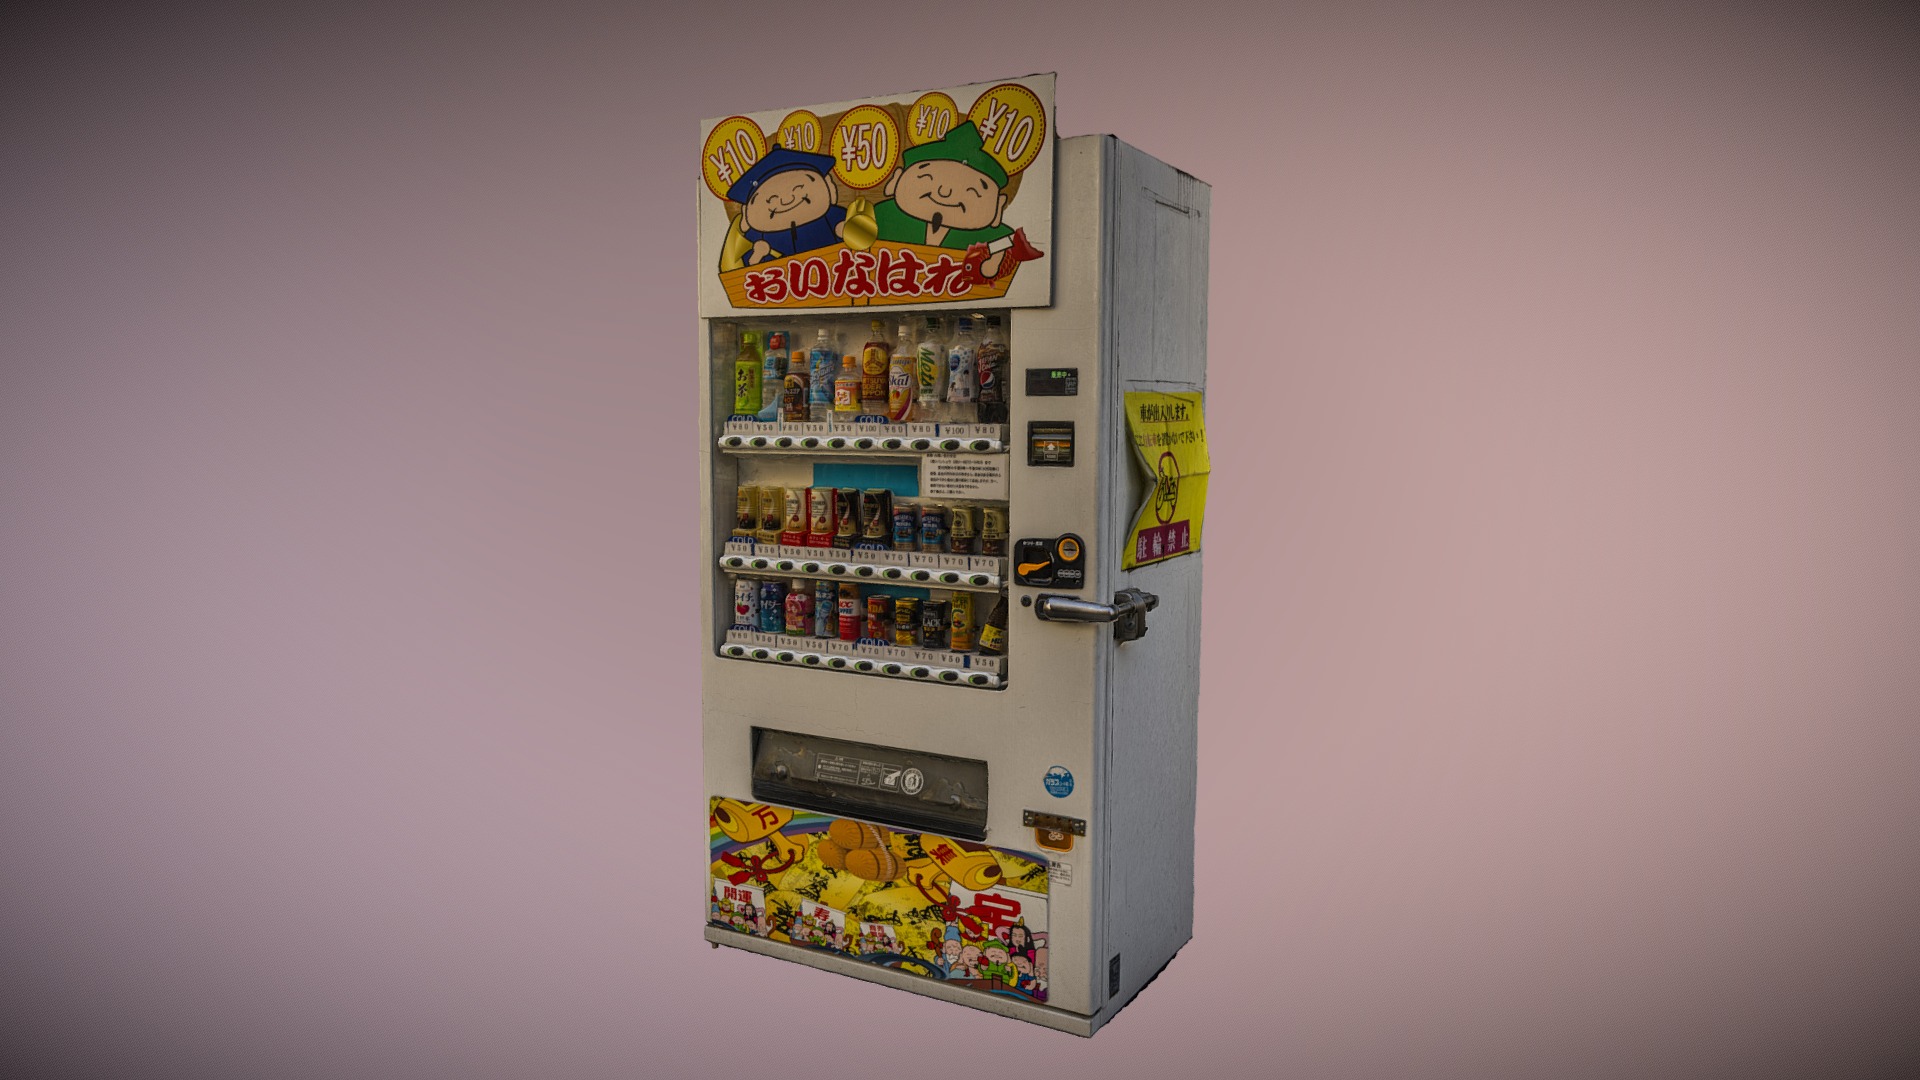 3D model Japanese vending machine photogrammetry scan - This is a 3D model of the Japanese vending machine photogrammetry scan. The 3D model is about a vending machine with a sign on it.